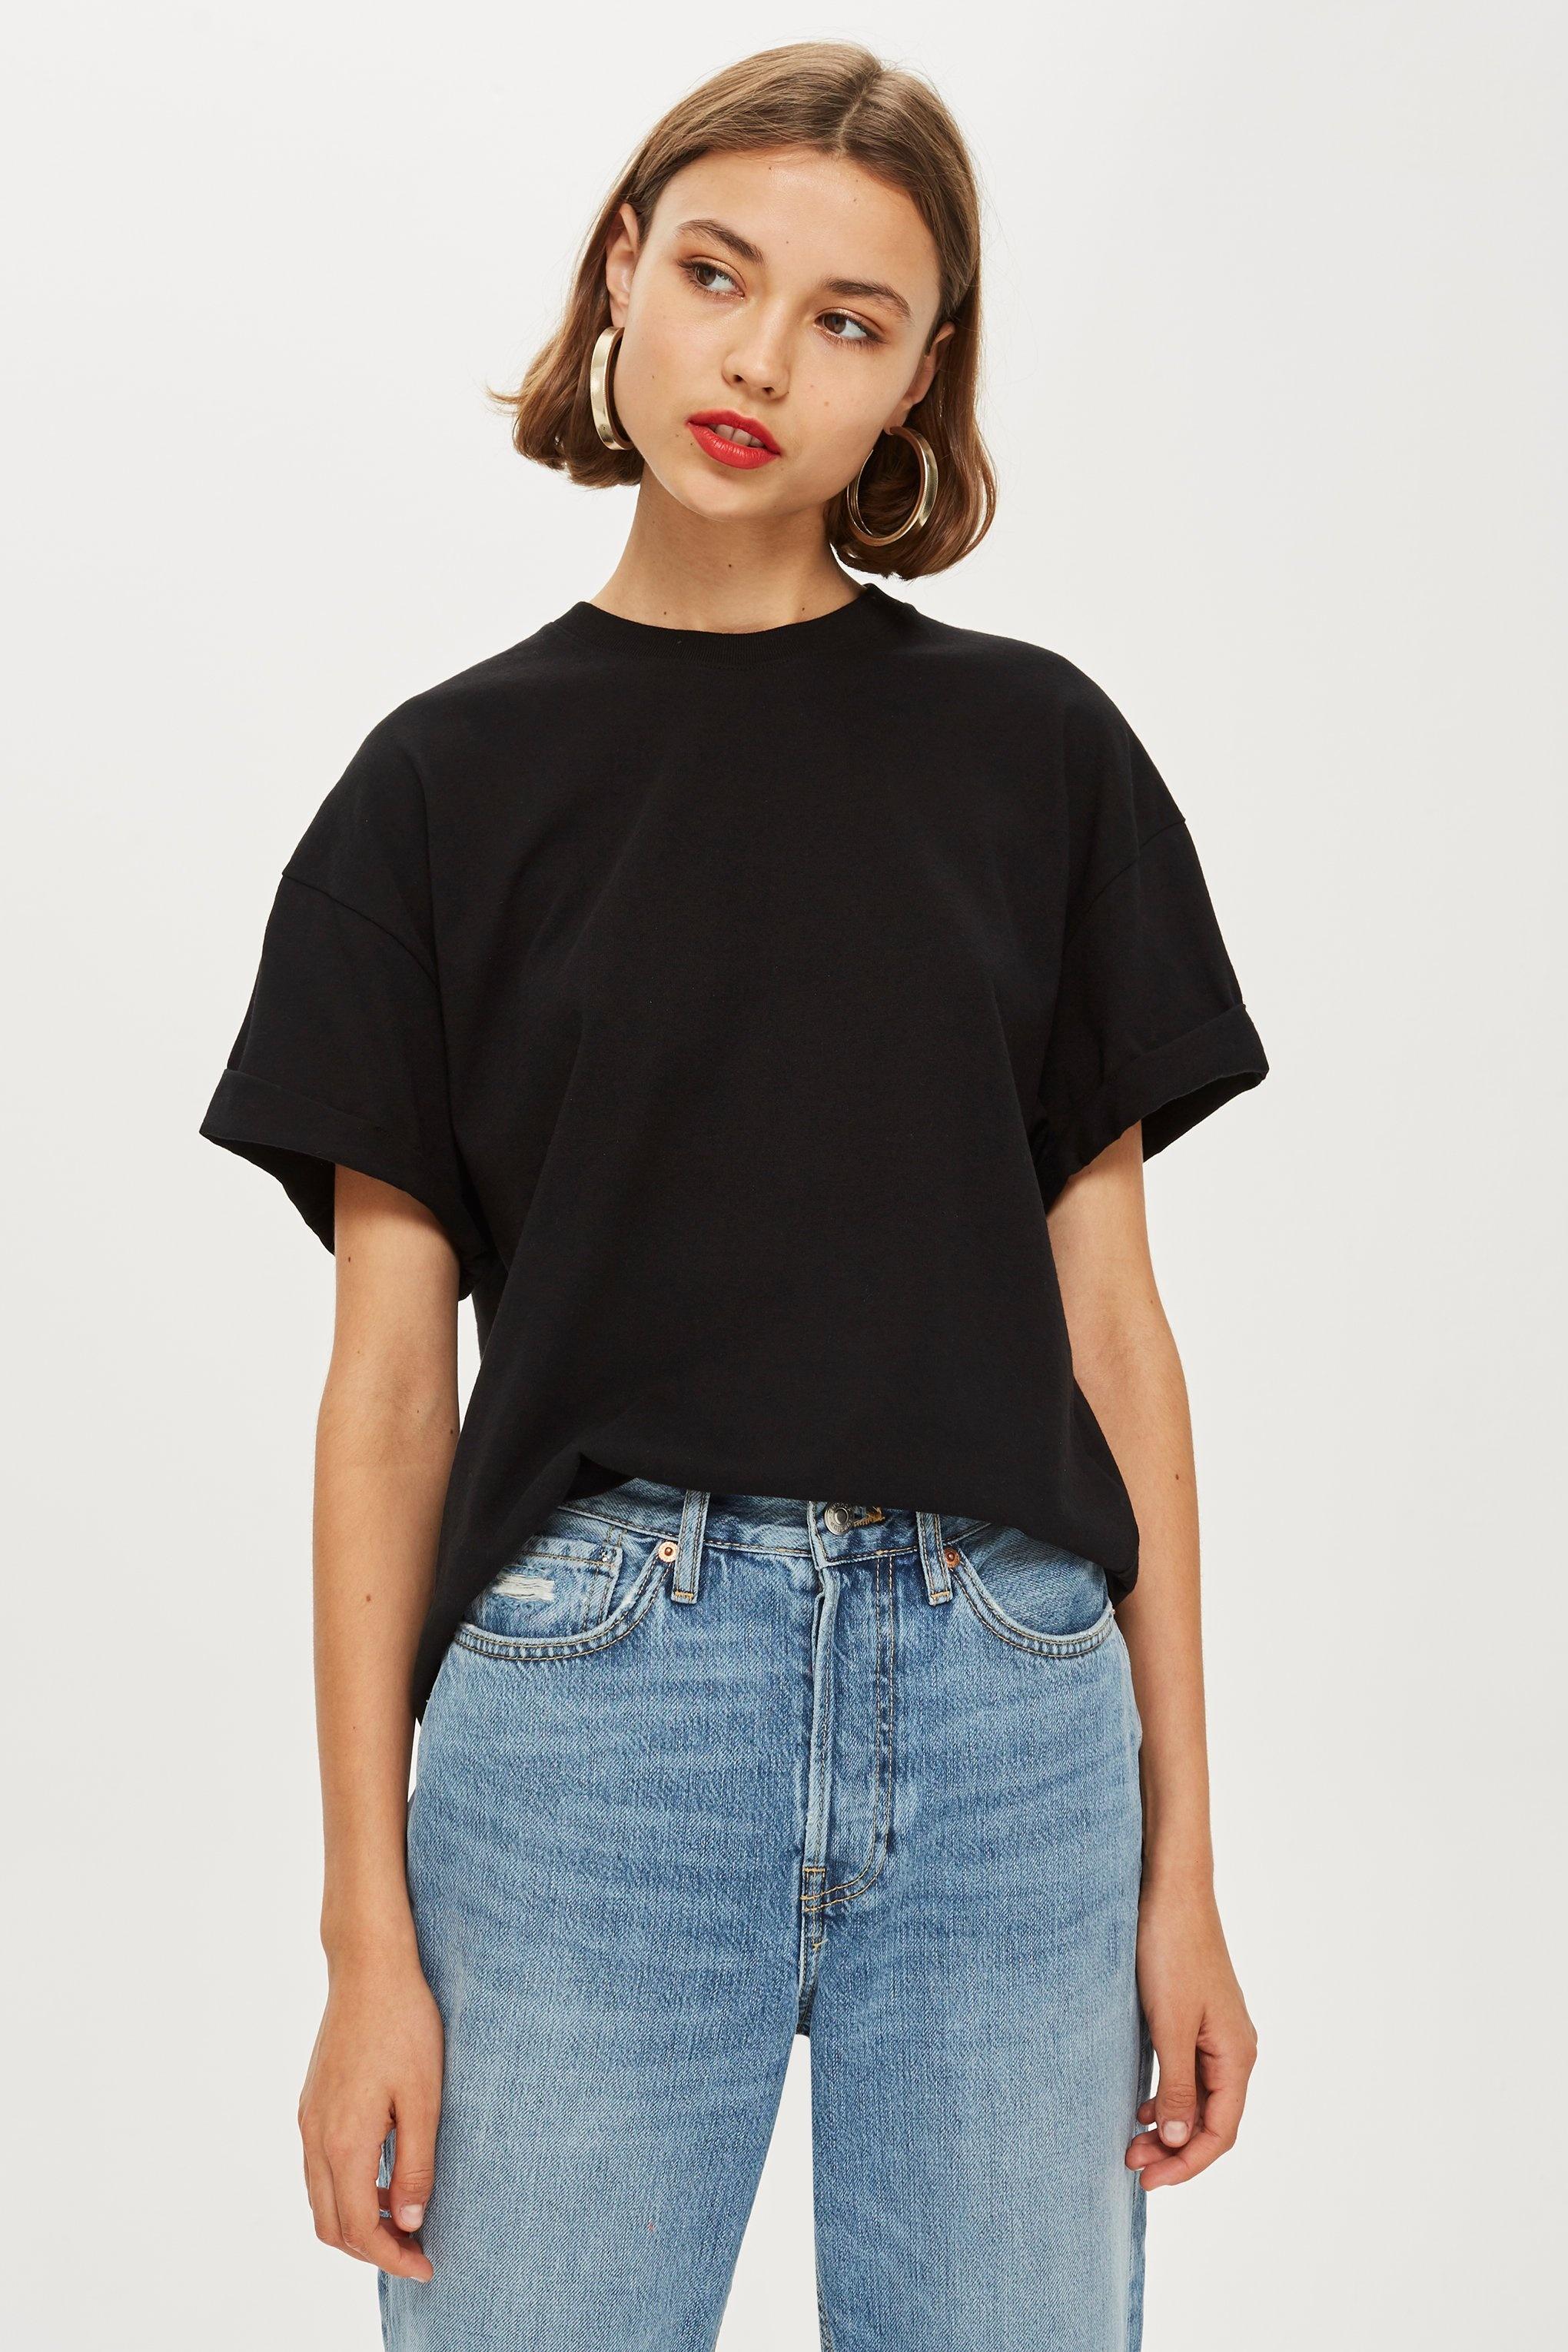 TOPSHOP Boxy Roll Sleeve T-shirt in Black - Lyst